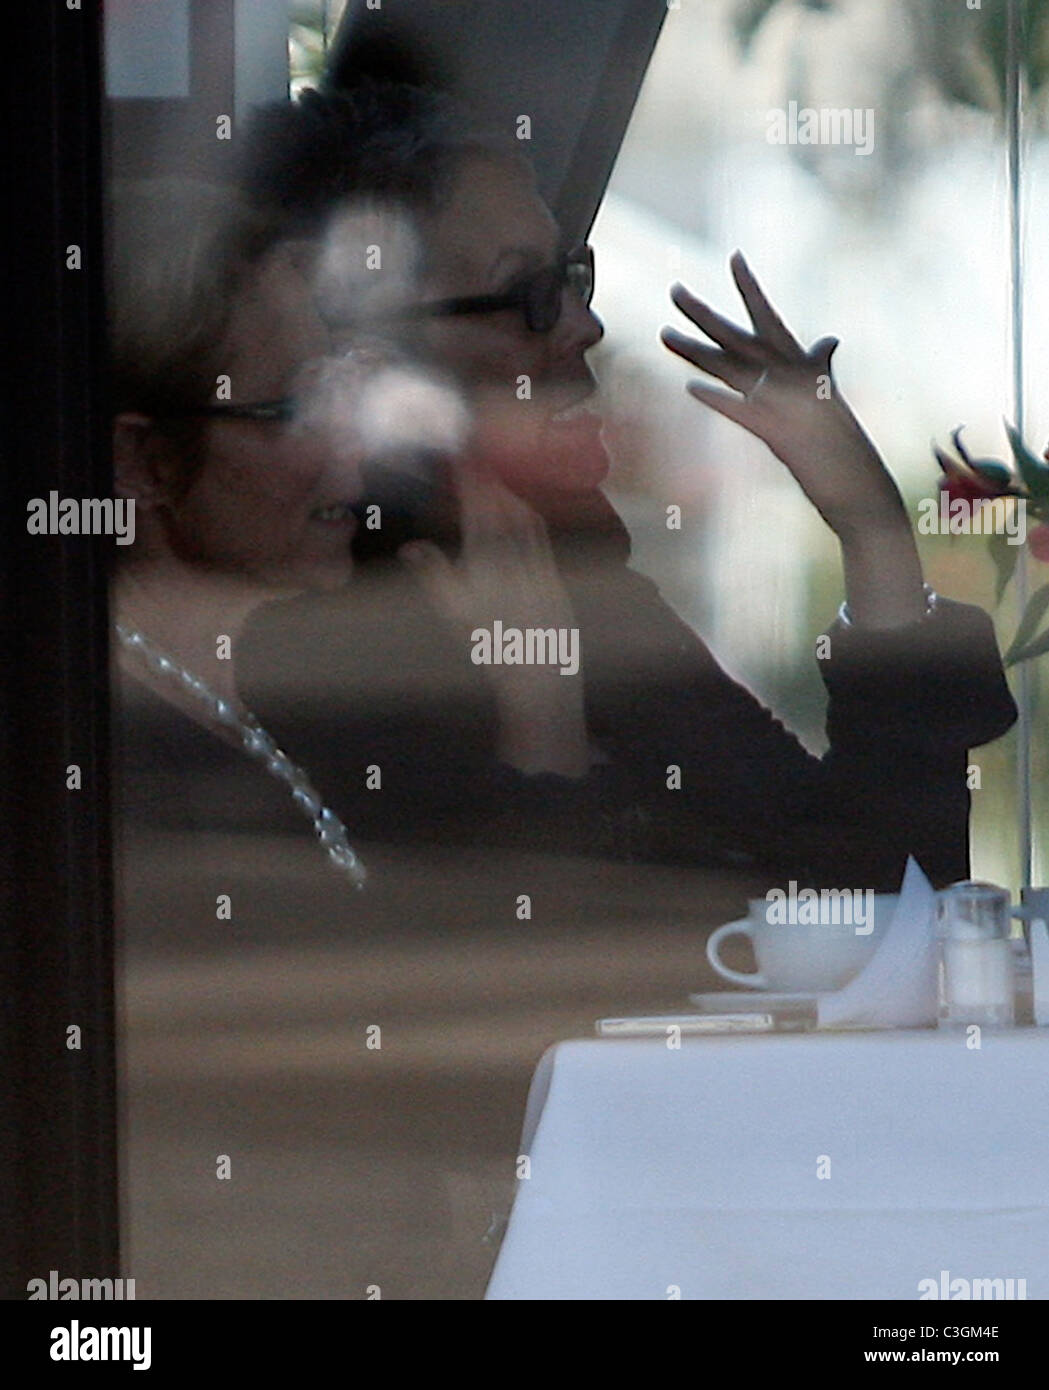 Actress Jamie Lee Curtis  having lunch with friends   Santa Monica, CA - 05.10.09  : .com Stock Photo